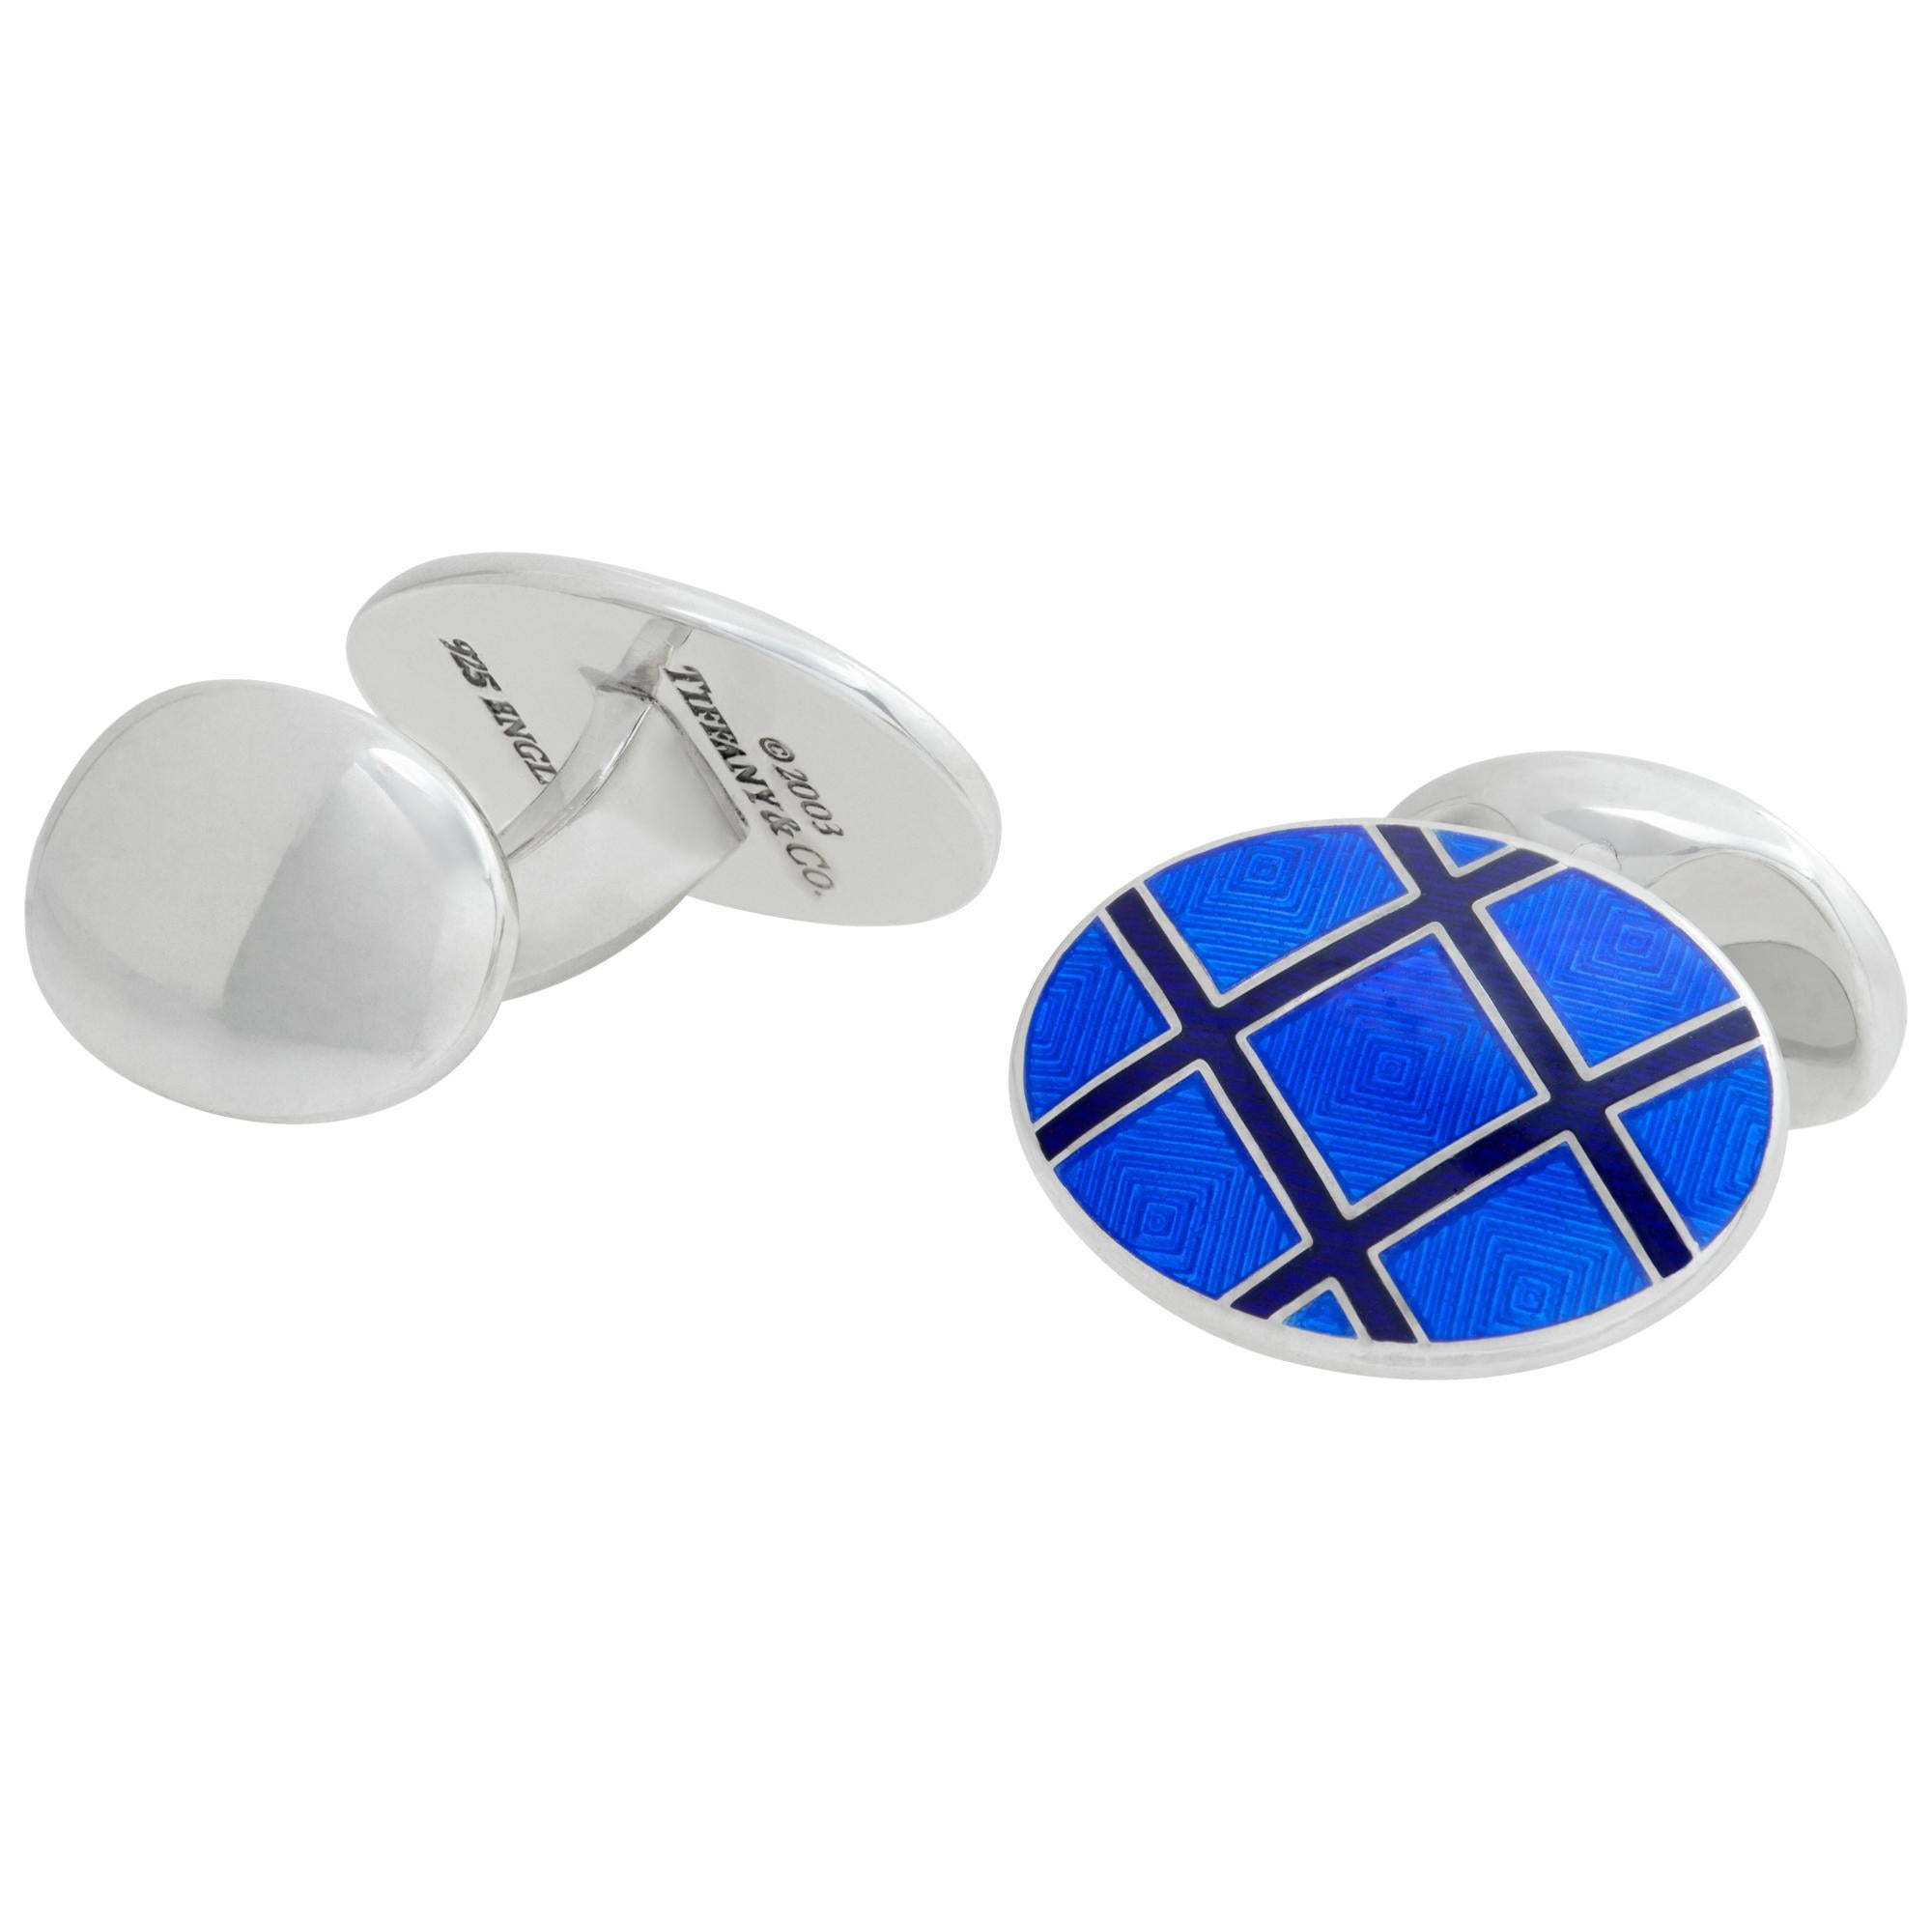 Tiffany & Co. Silver Cufflinks with Blue & Black Enamel Cross Pattern In Excellent Condition For Sale In Surfside, FL